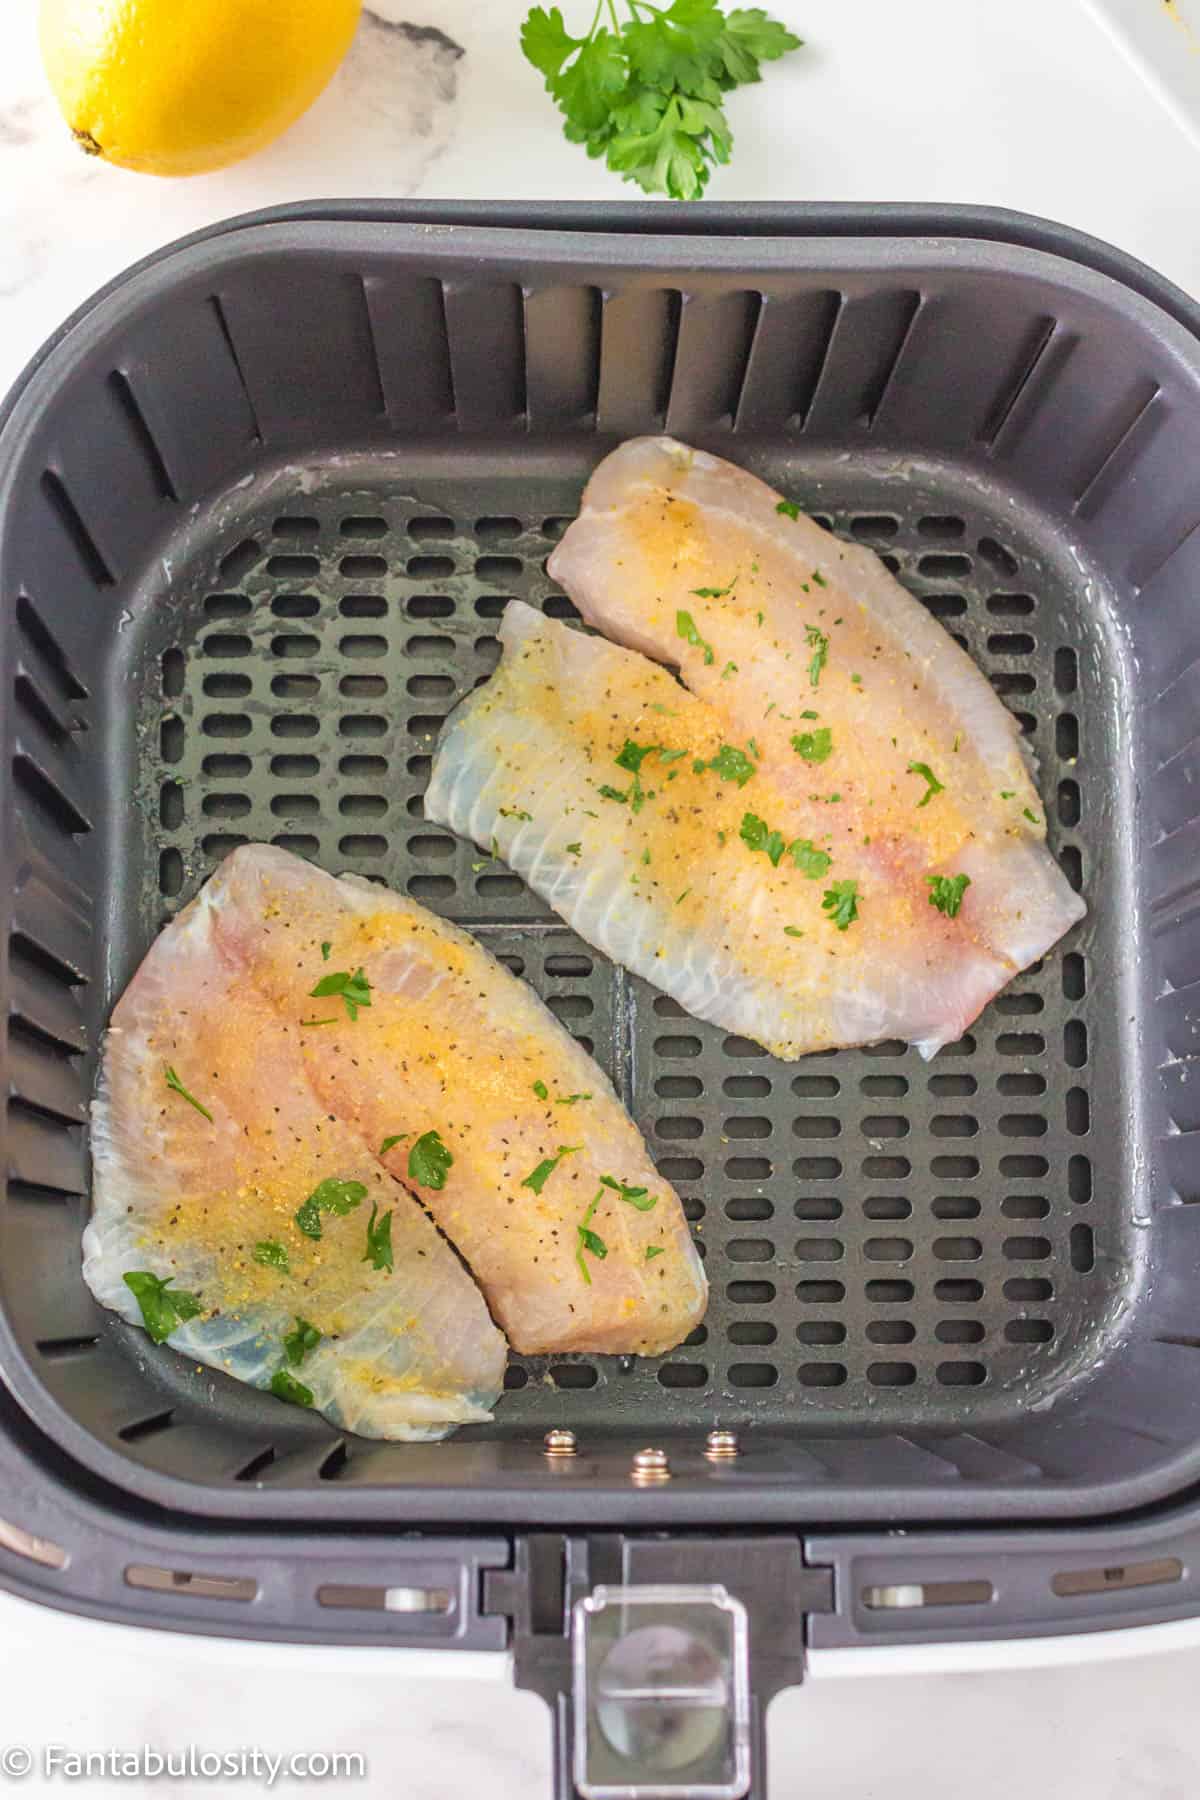 Raw tilapia in then air fryer basket, covered in spices.